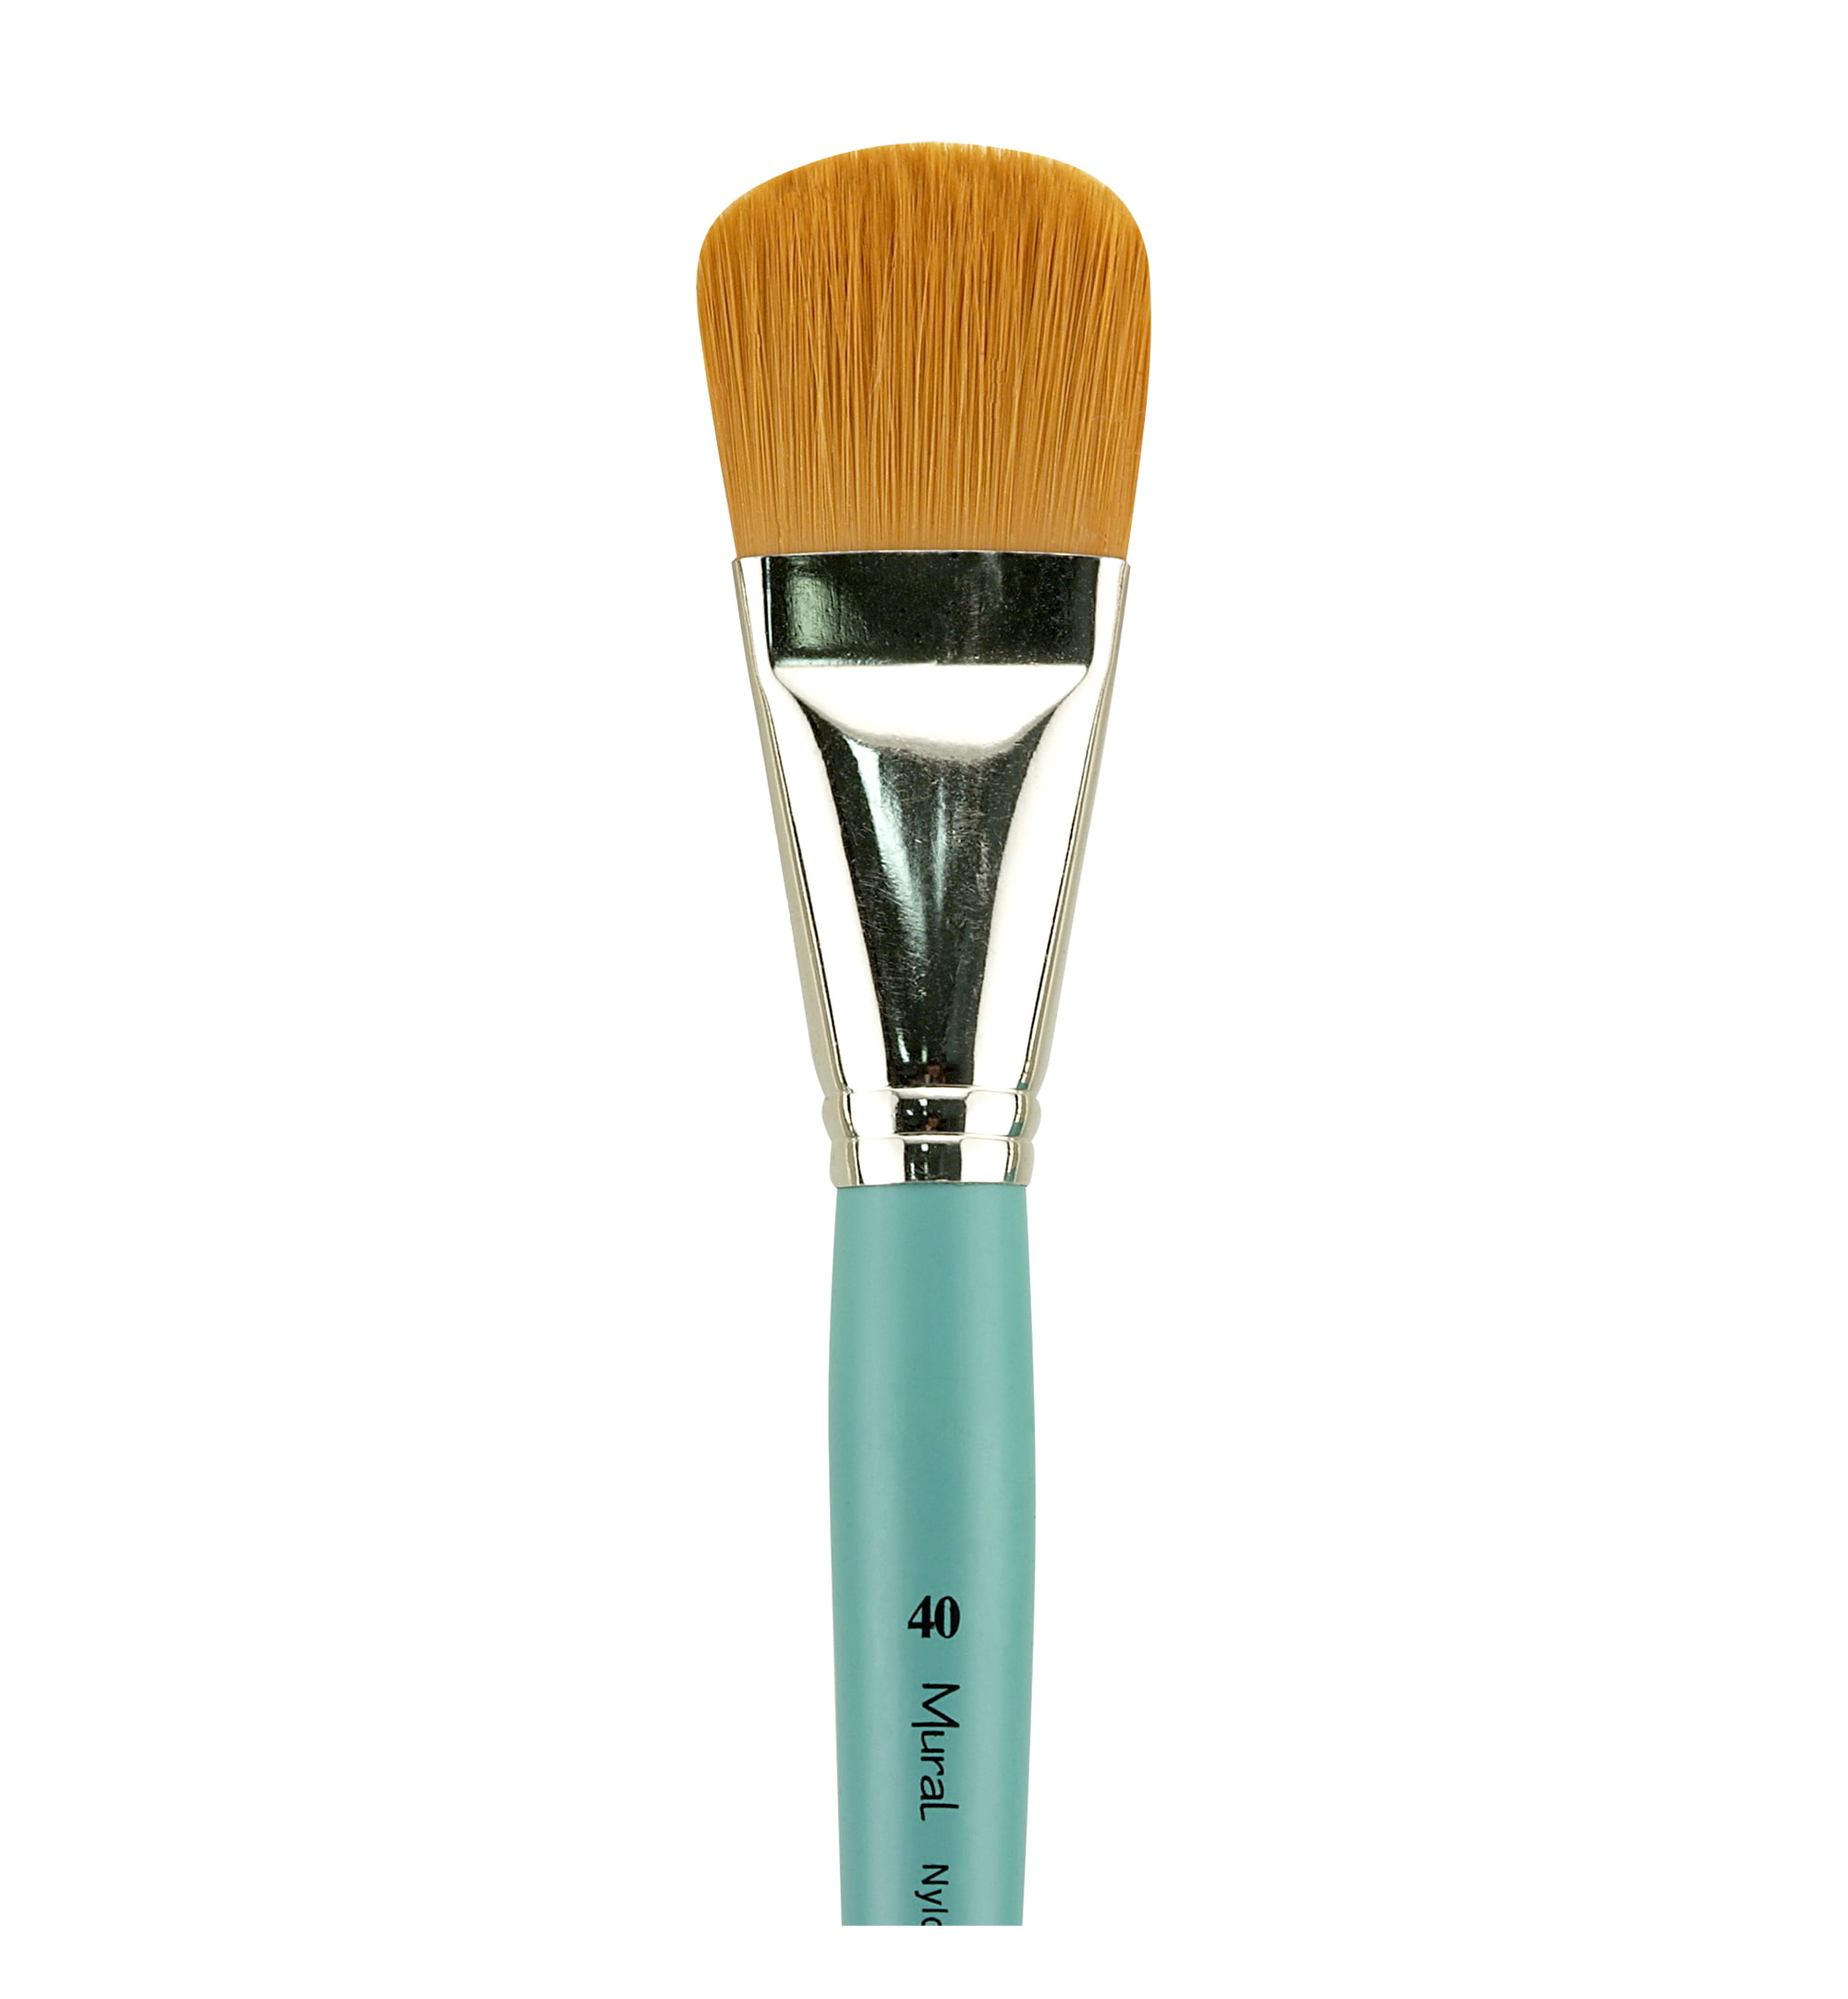 Creative Mark Pro Control Extra Wide Large Synthetic Brushes -  Multi-Filament Brush for Large Paint Coverage, Mural Painting, and More! -  [Size - 8]